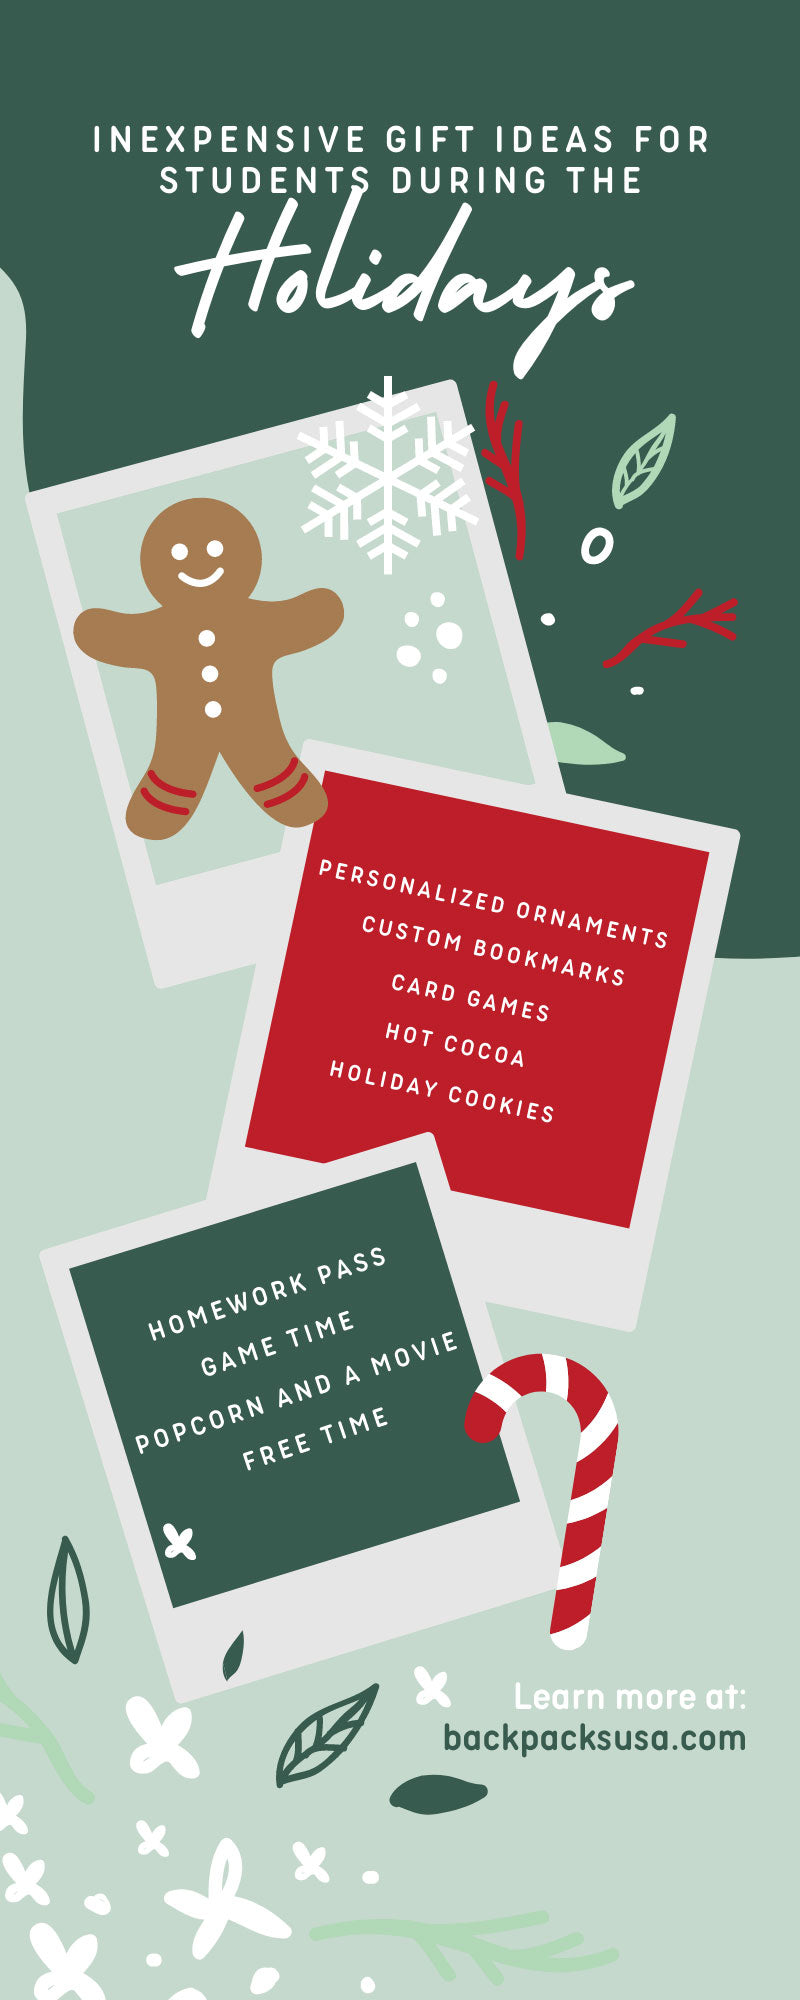 Inexpensive Gift Ideas for Students During the Holidays